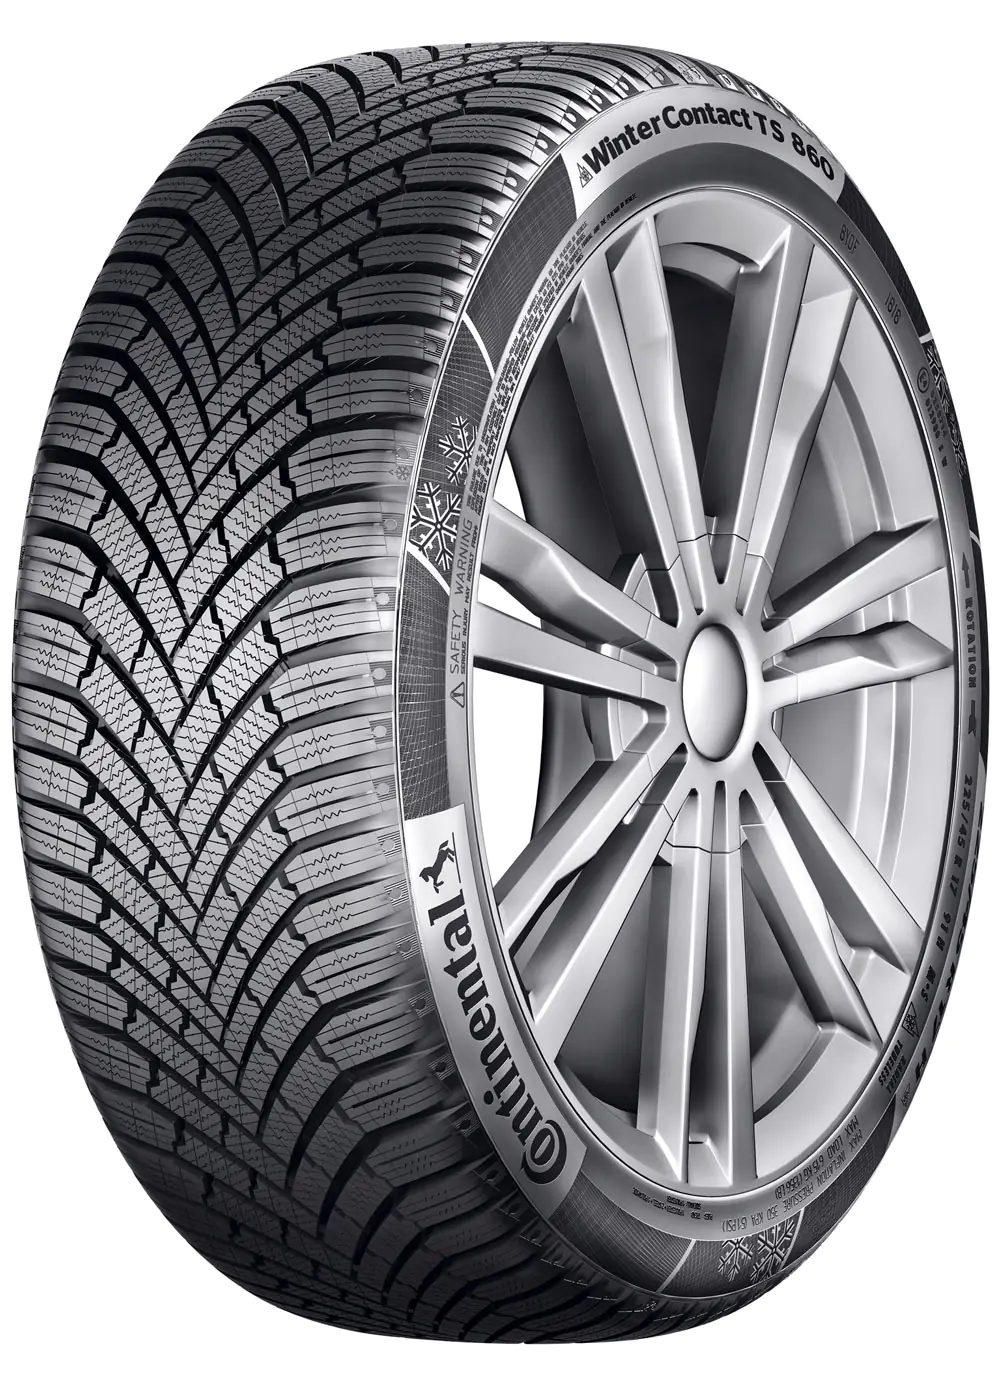 Gomme Autovettura Continental 295/30 R21 102V WinterContact TS 860 S XL M+S Invernale